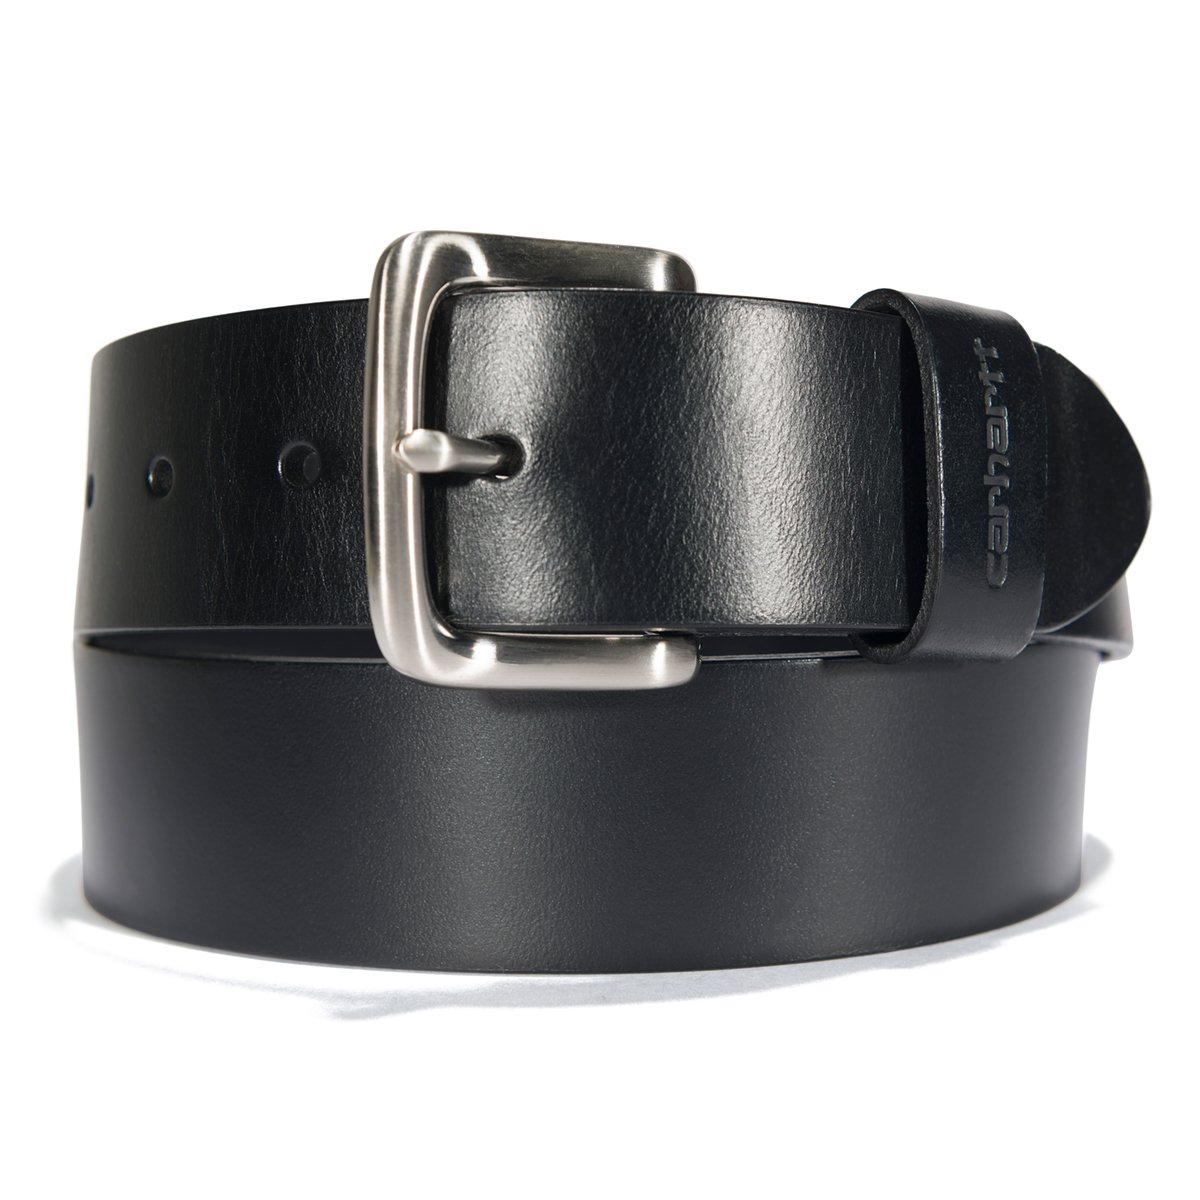 Carhartt Women's Bridle Leather Classic Buckle Belt with Nickel Roller Finish - A000550900